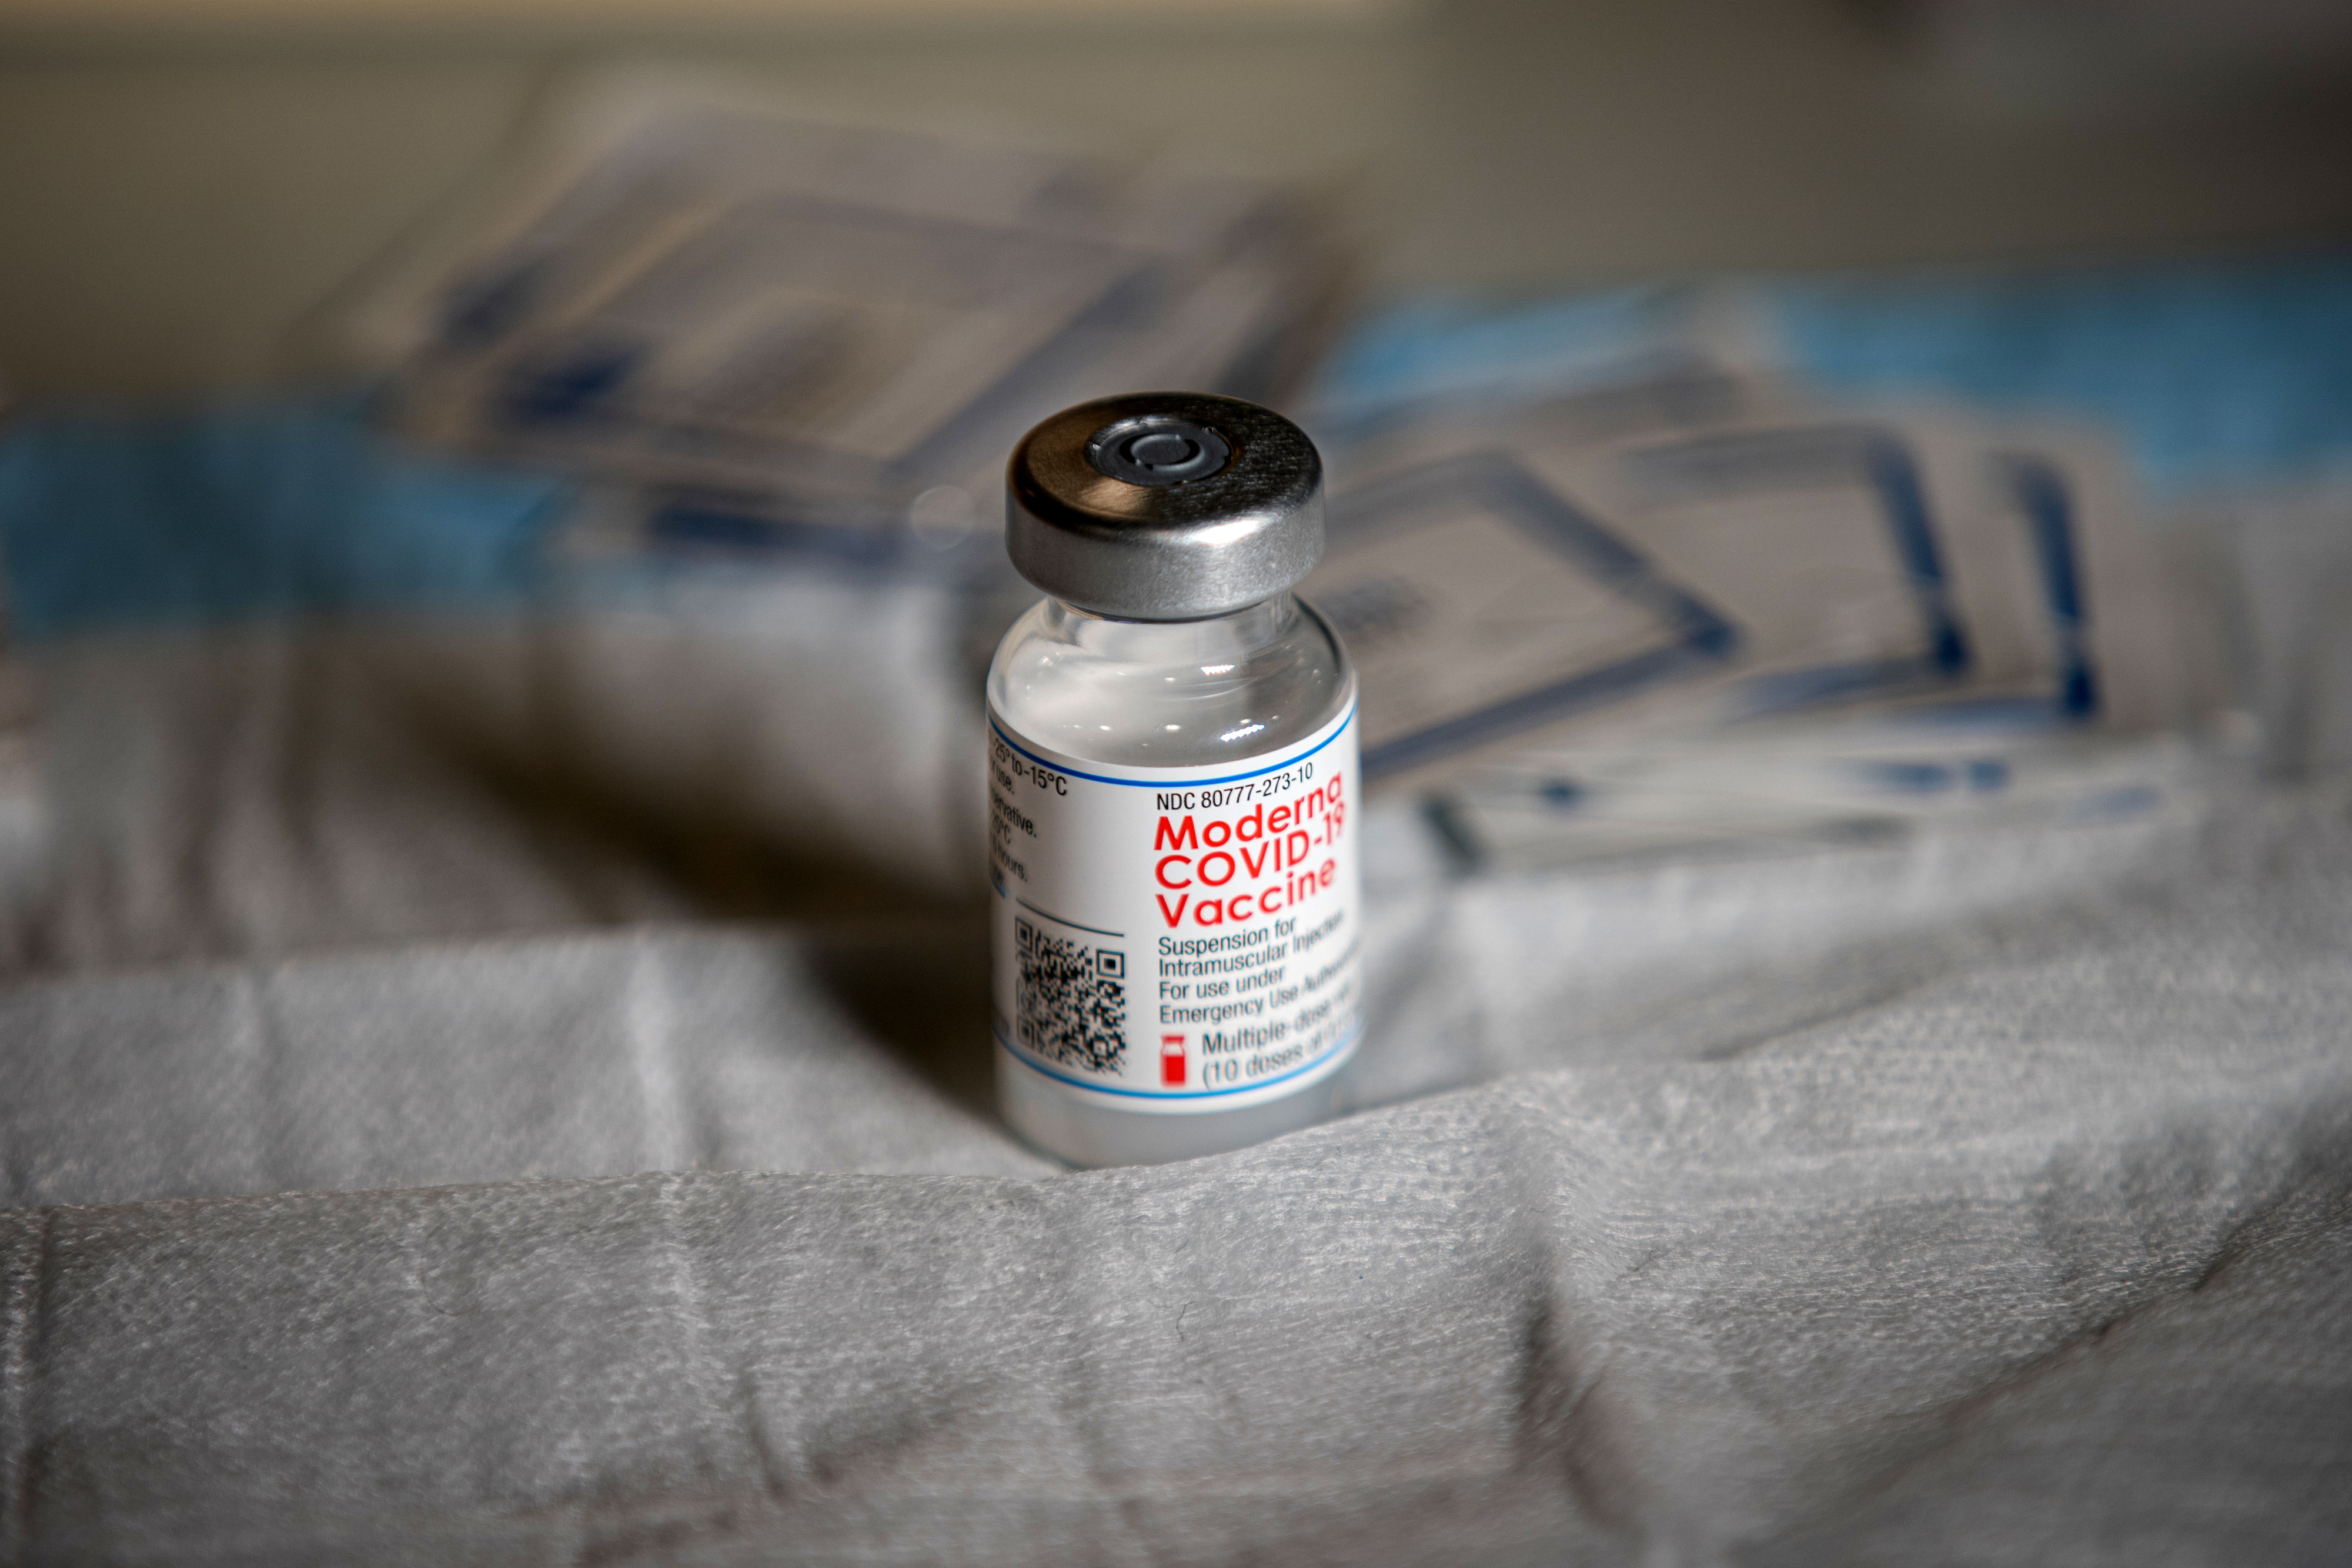 A vial of the Moderna Covid-19 vaccine in Queens, New York, on January 11.